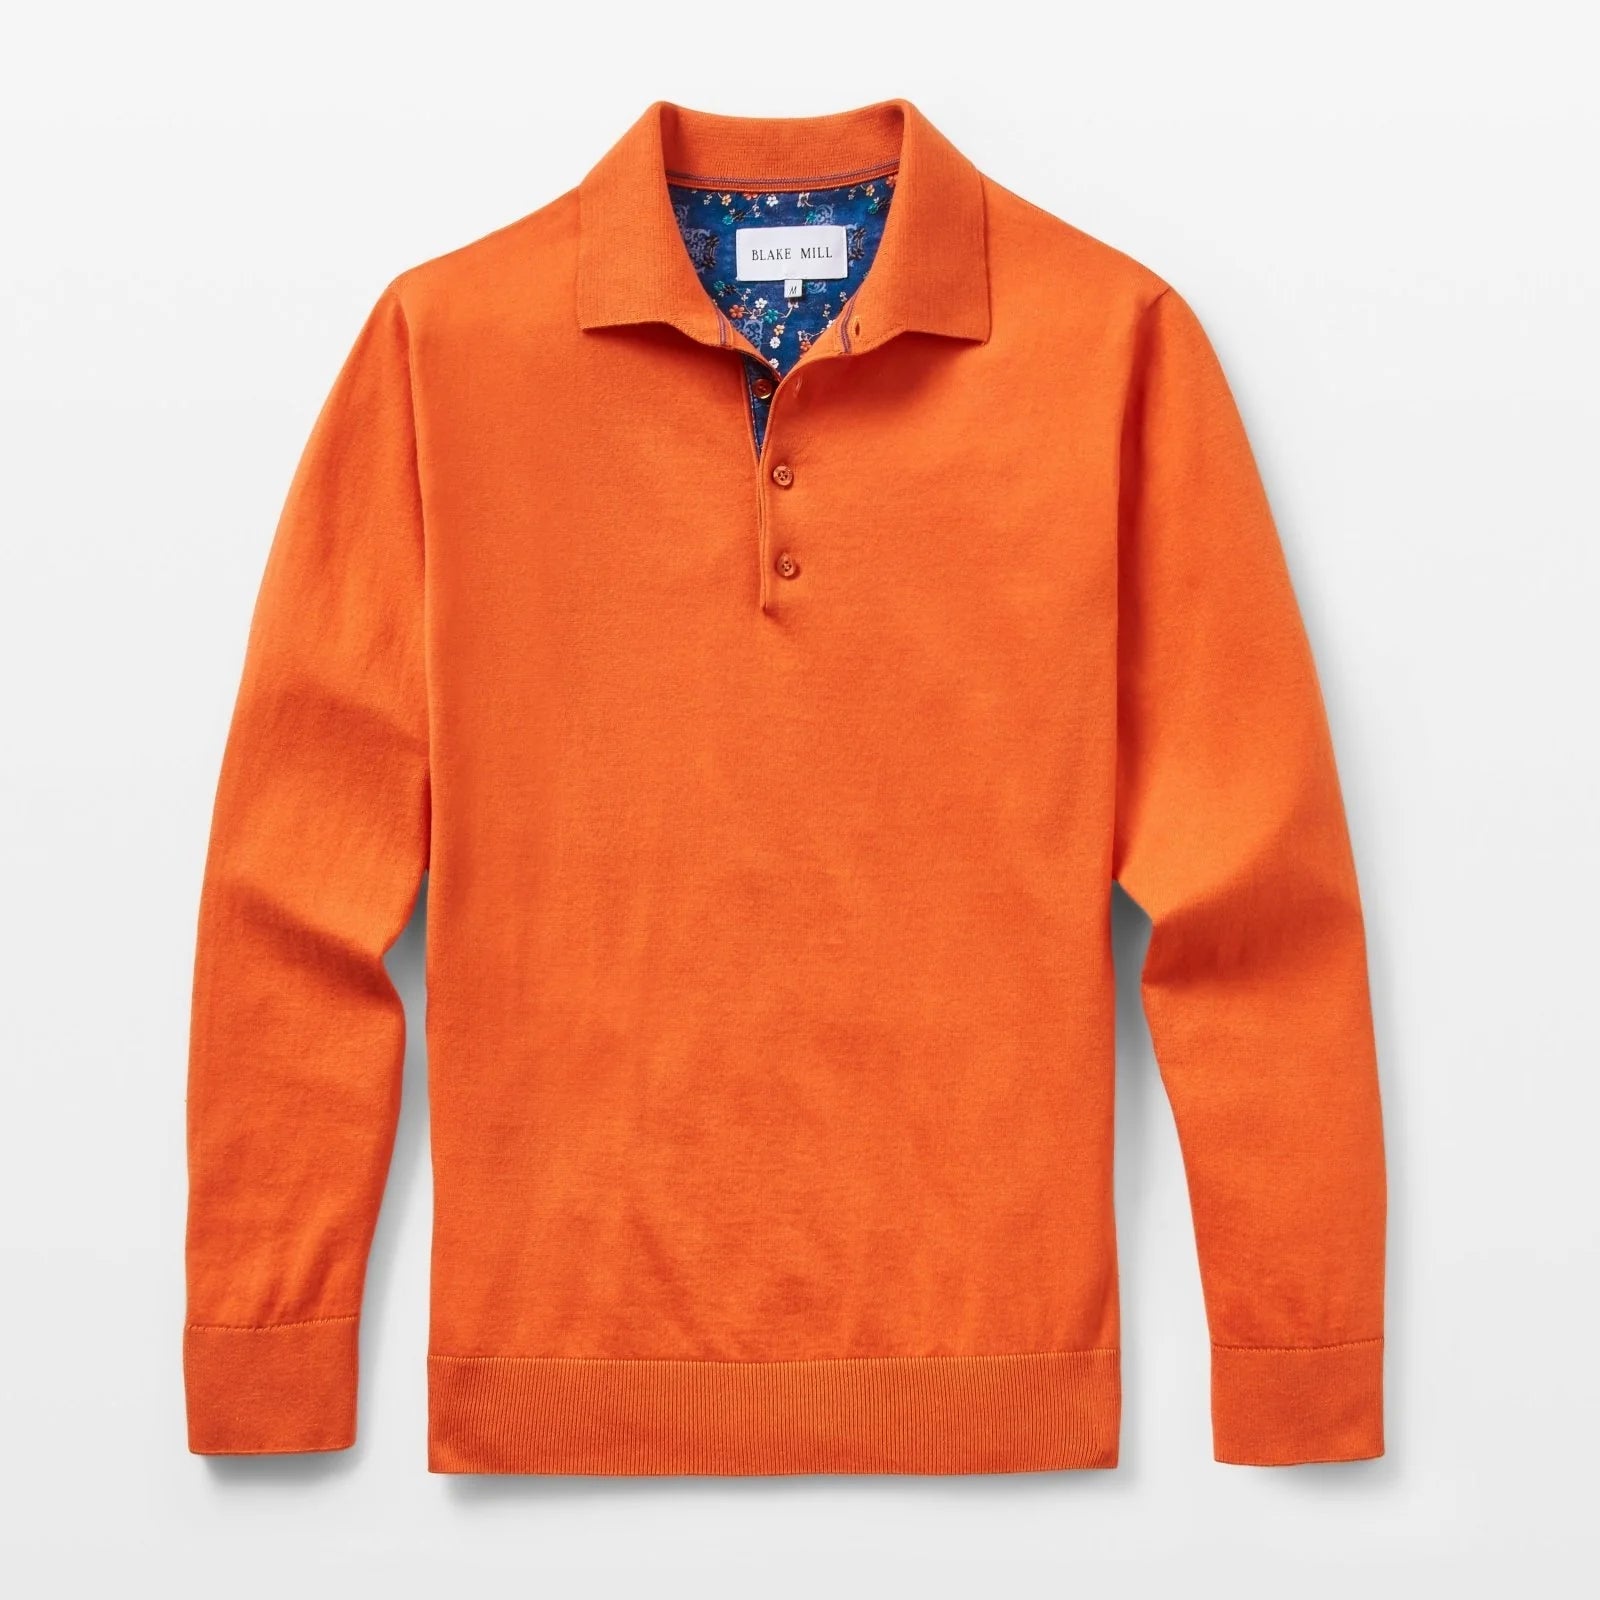 Cashmere Pullovers & The 'Old Money' Aesthetic - Sophisticated Jerseys for Men - Blake Mill